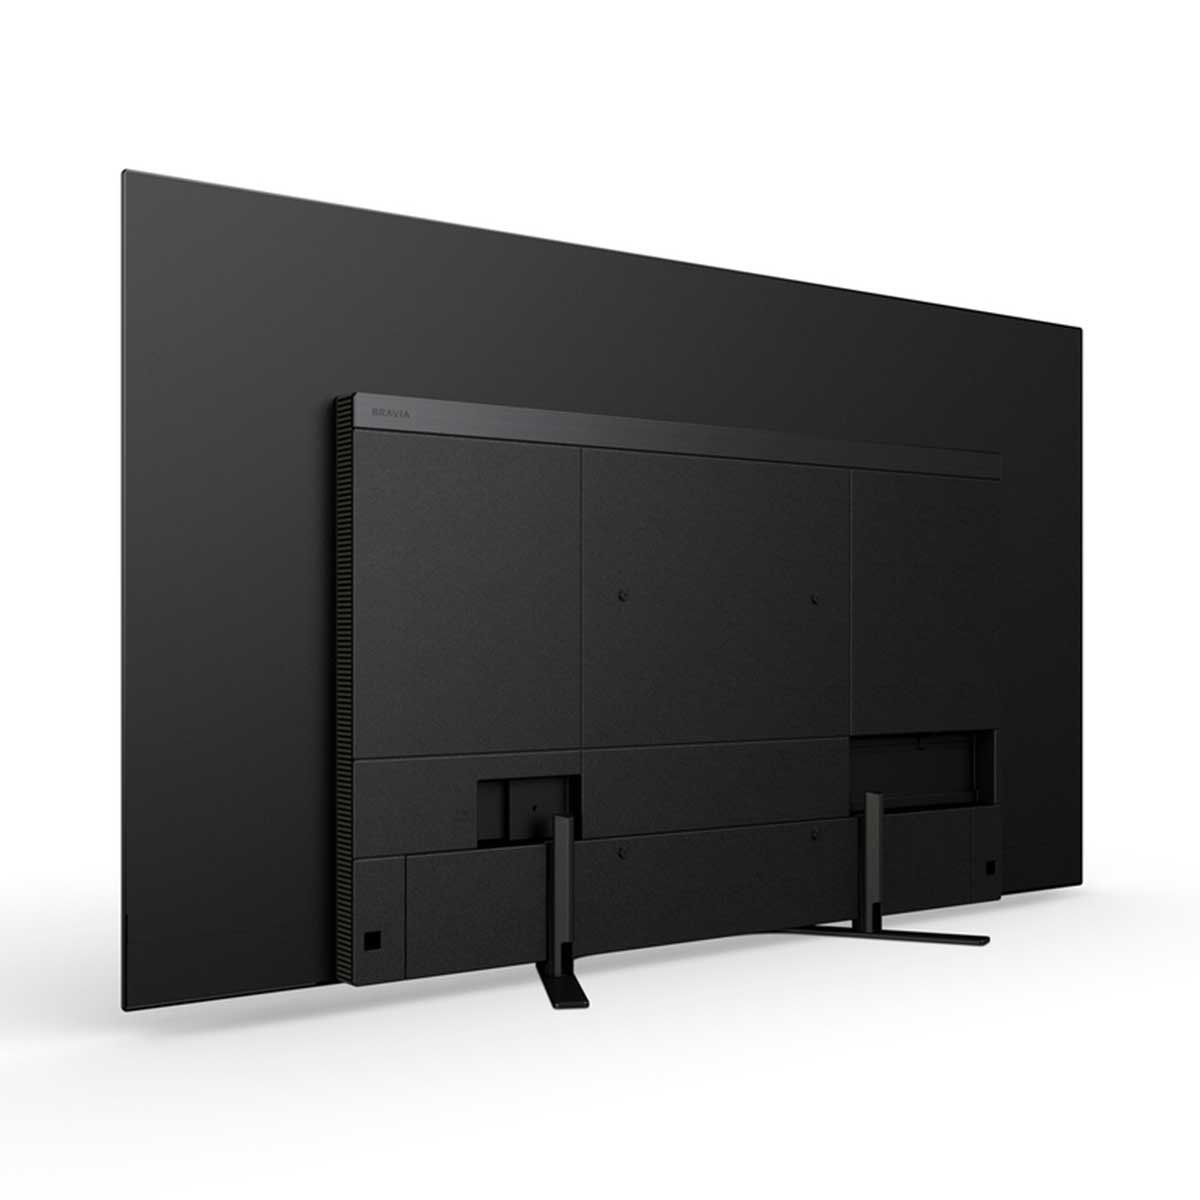 Pantalla 55" Oled 4K Ultra Hd Android Tv Serie A8G Sony